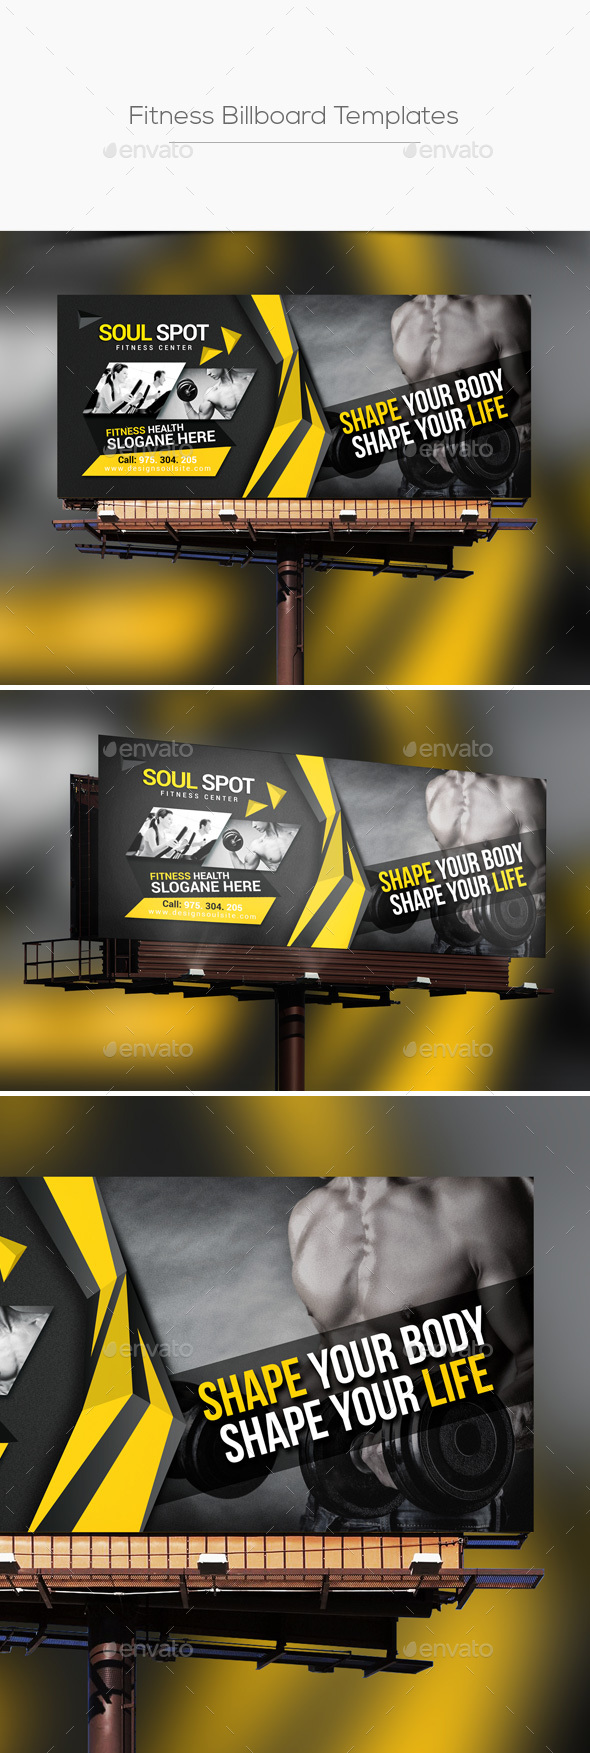 14 fitness billboard templates preview